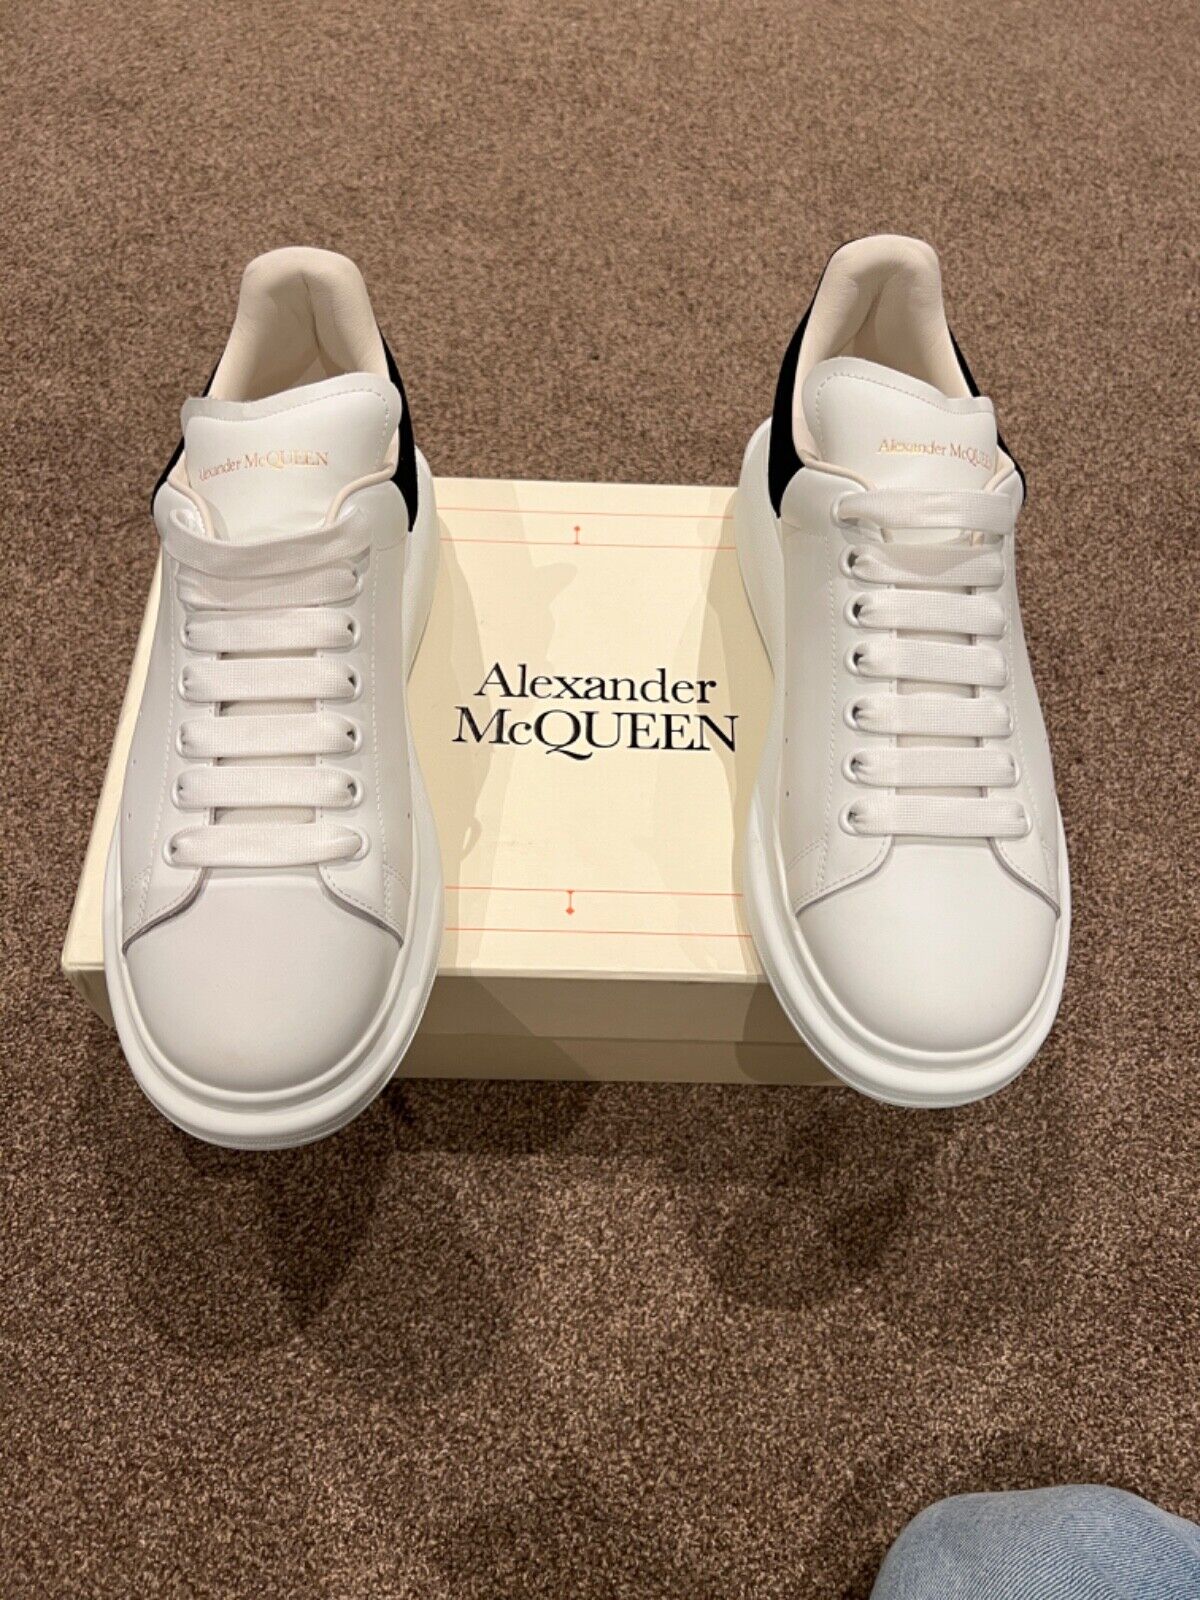 ALEXANDER MCQUEEN Oversized Larry Sneakers White Leather Men\'s Size  45 Shoes